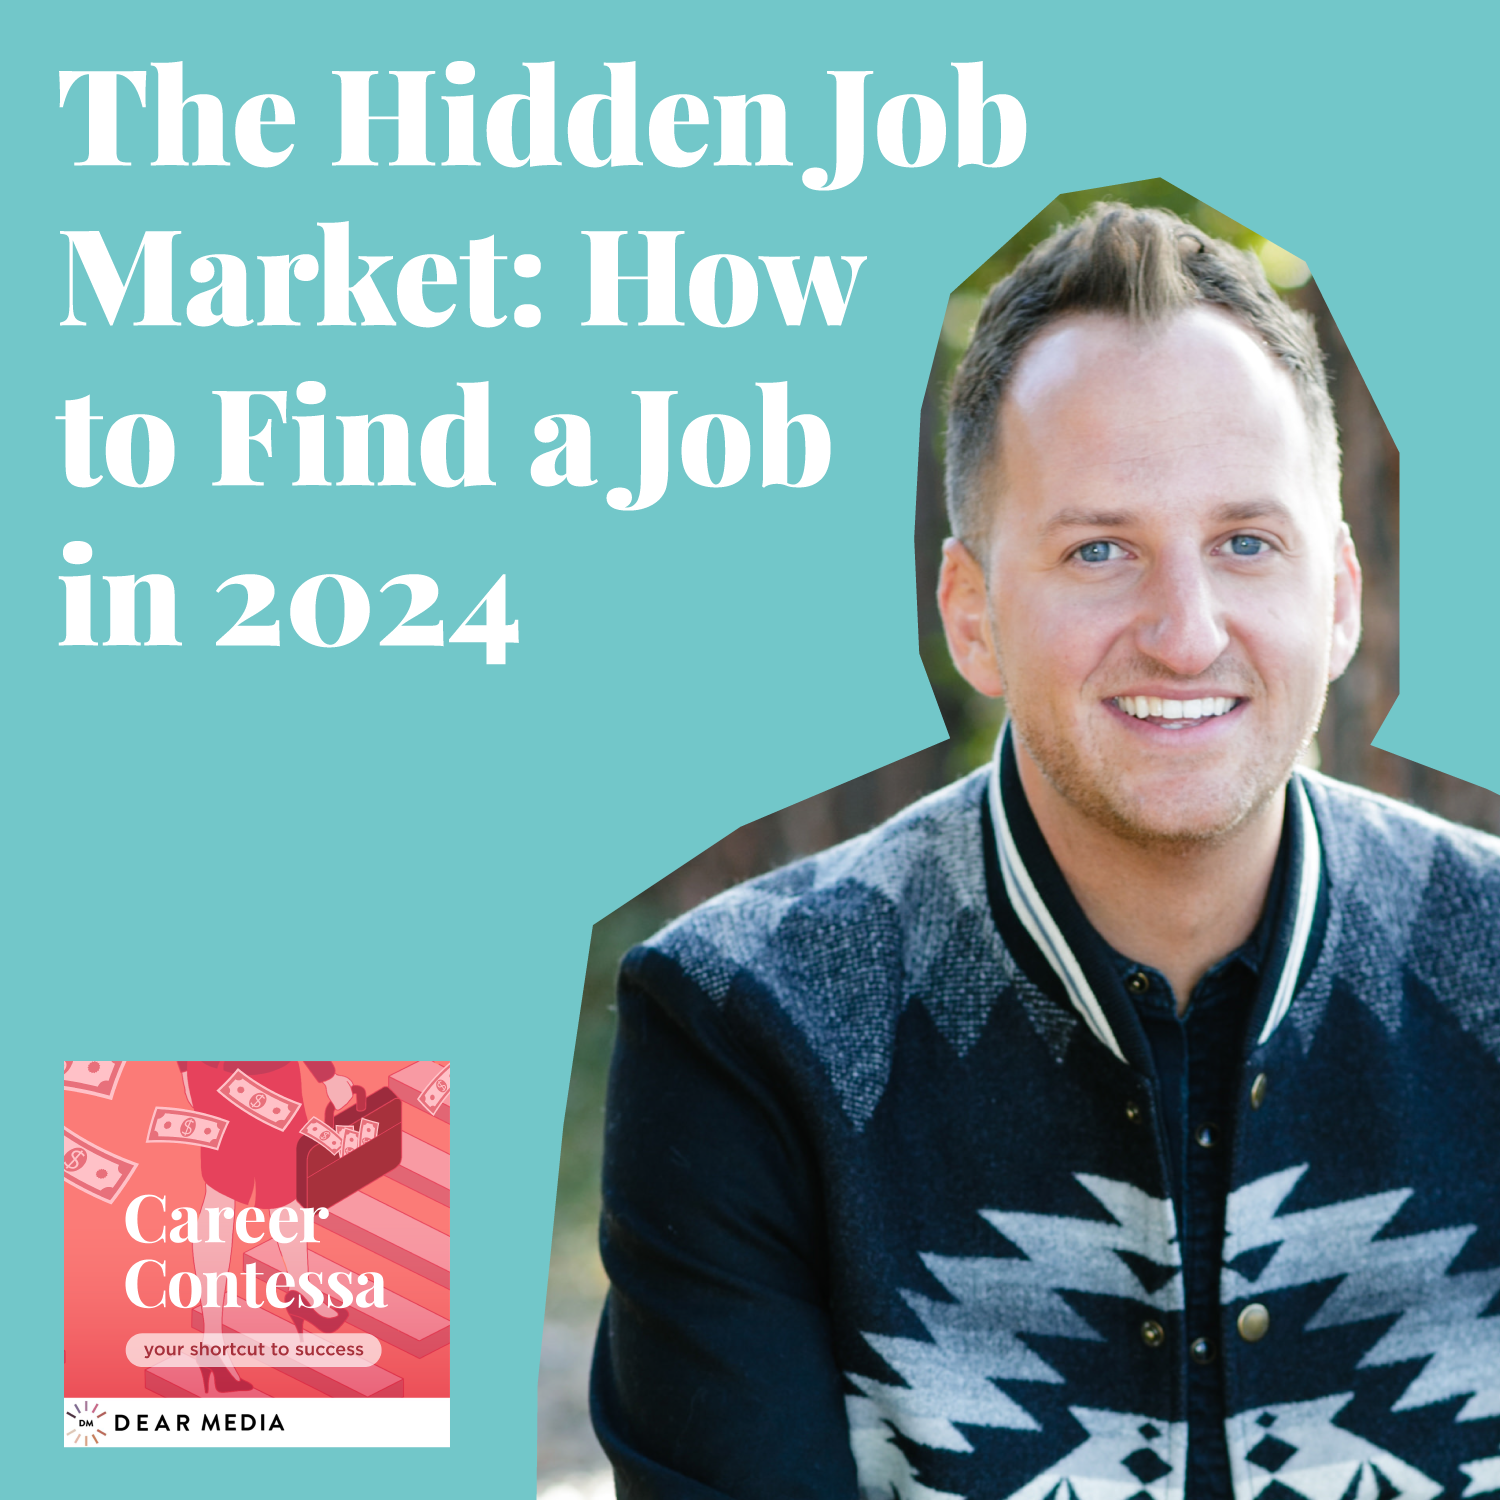 The Hidden Job Market: How to Find a Job in 2024 Image